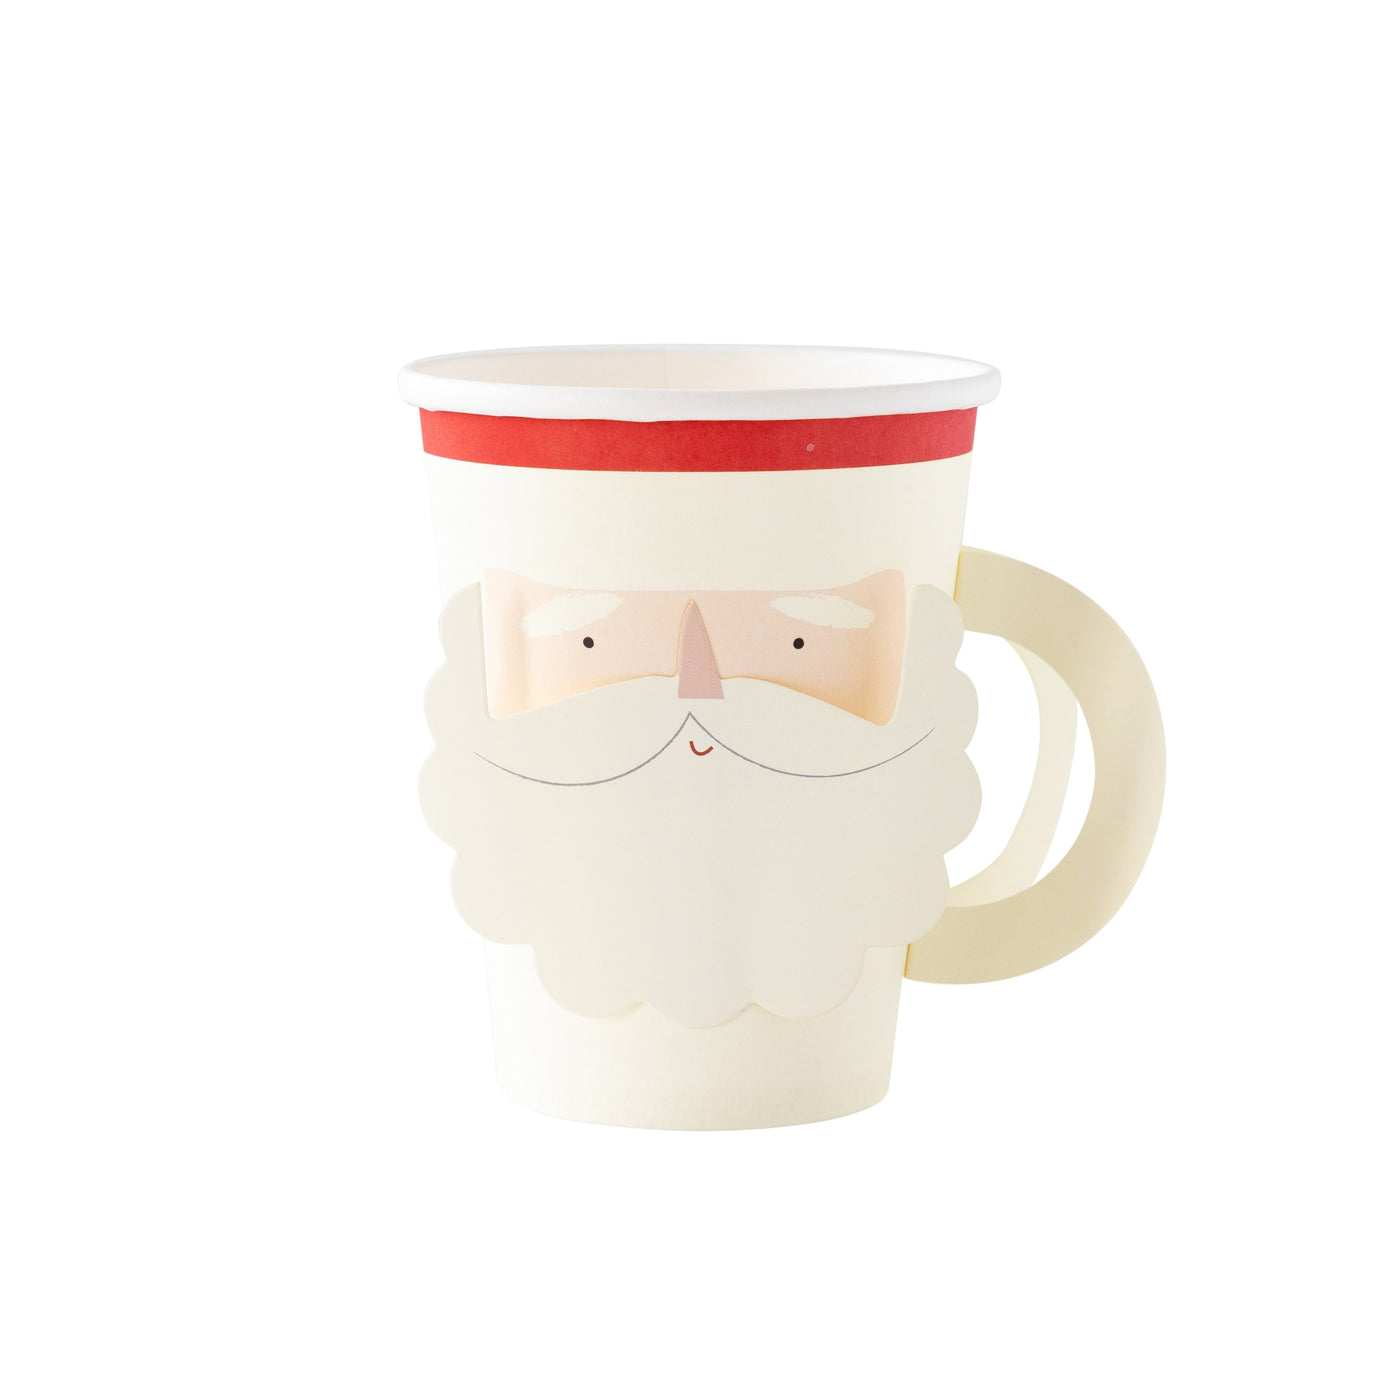 BEC1012 - Believe Santa Face With Handle Paper Party Cup